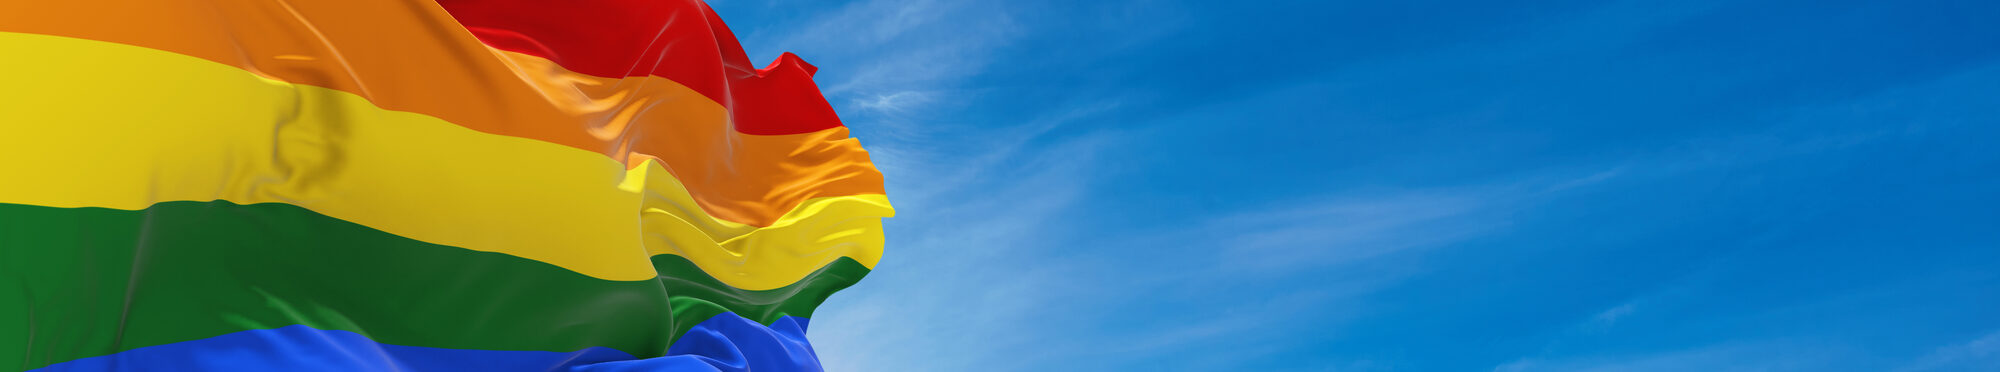 Gay Pride flag waving in the wind at cloudy sky. Freedom and love concept. Pride month. activism, community and freedom Concept. Copy space. 3d illustration,